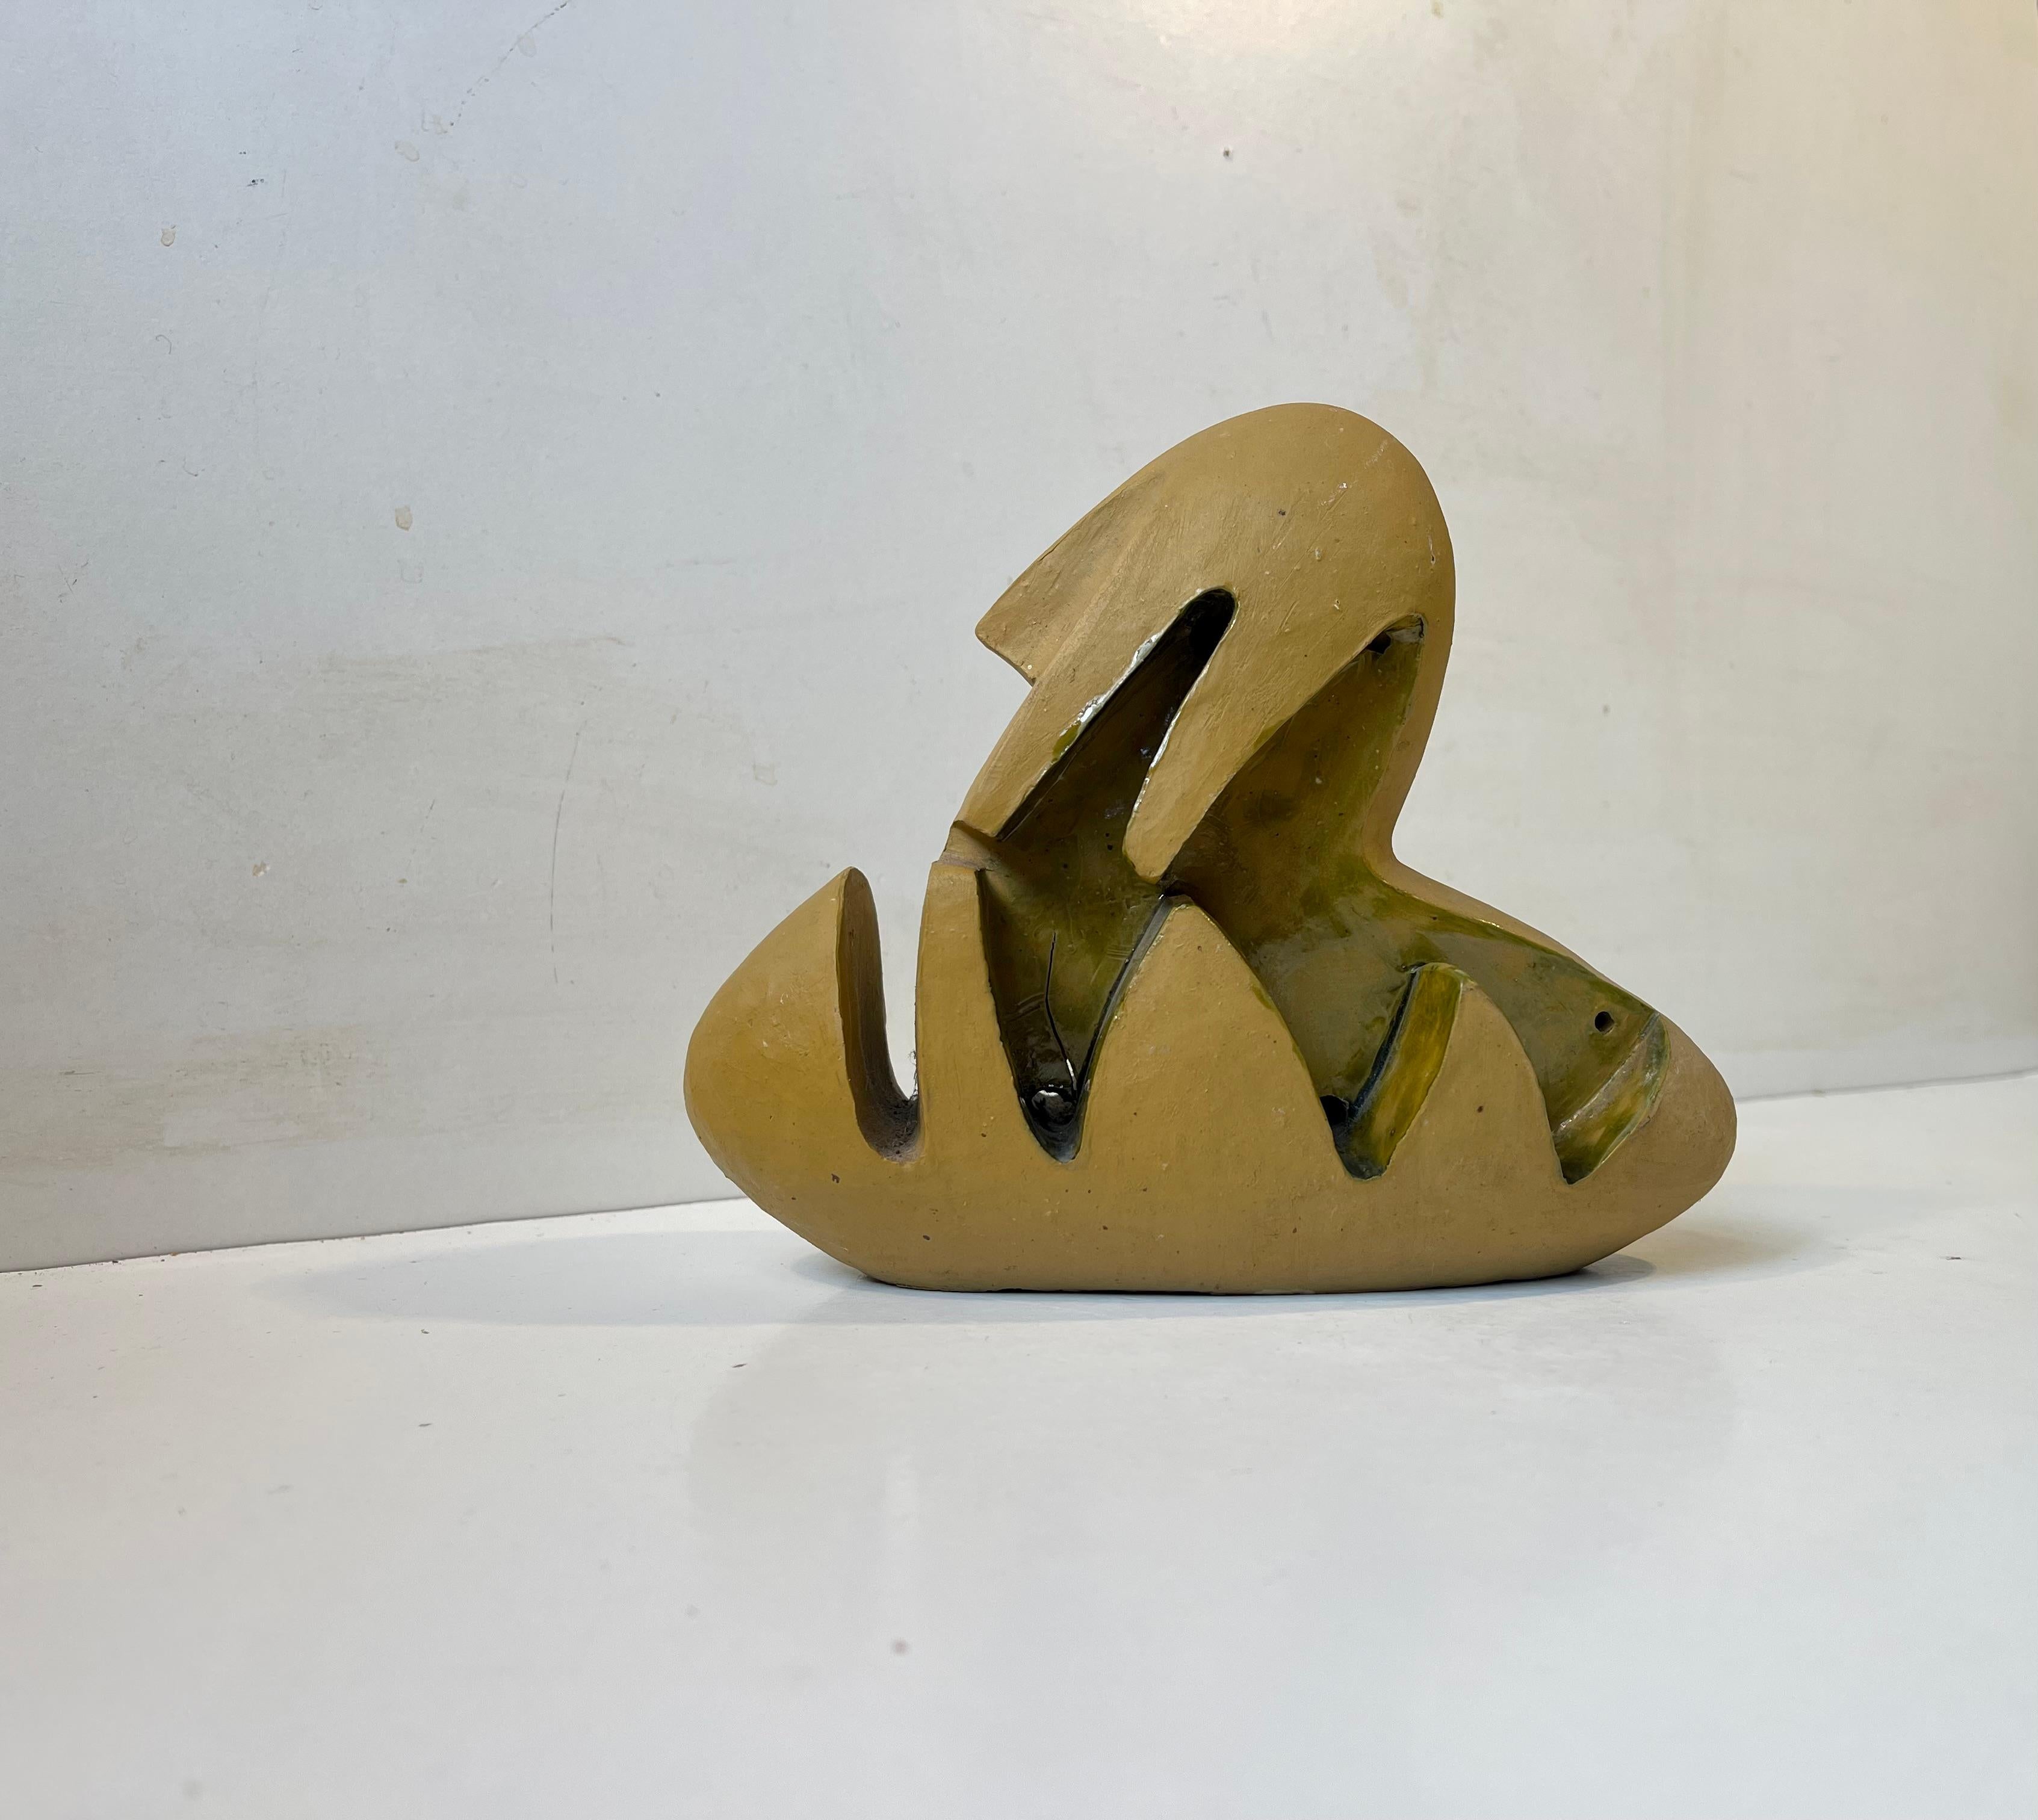 A 1960s sculptural surrealist figurine/ornament in partially glazed and hand-painted ceramic. An abstract form based upon an ovoid main shape. The main color is mustard and the applied glaze olive/pickle in tonality.  Uniquely made by the Danish